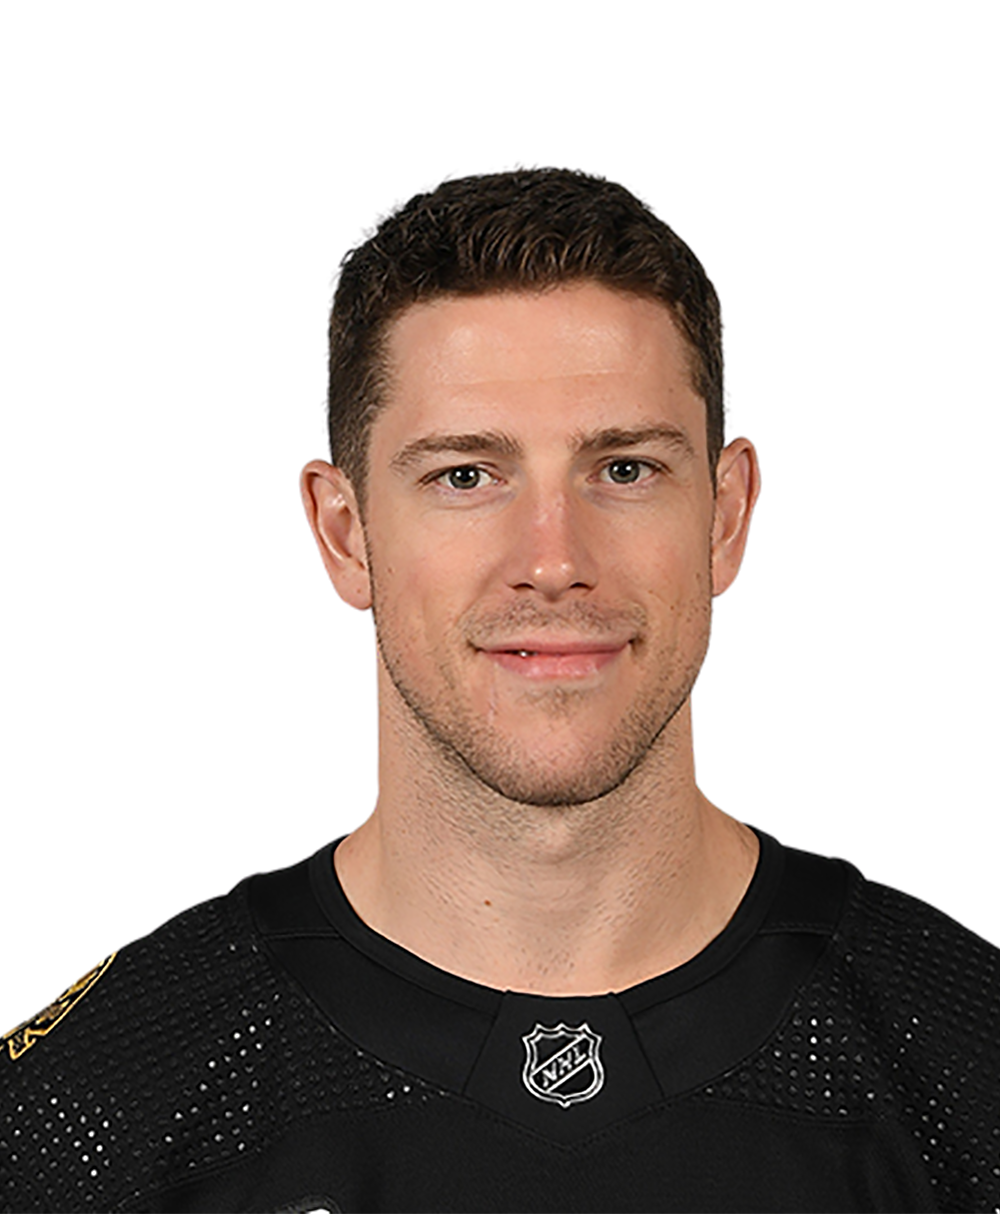 Download wallpapers Charlie Coyle, 4k, Boston Bruins, NHL, hockey players,  neon lights, Charles Robert Coyle, USA, Charlie Coyle Boston Bruins, hockey,  Charlie Coyle 4K for desktop free. Pictures for desktop free